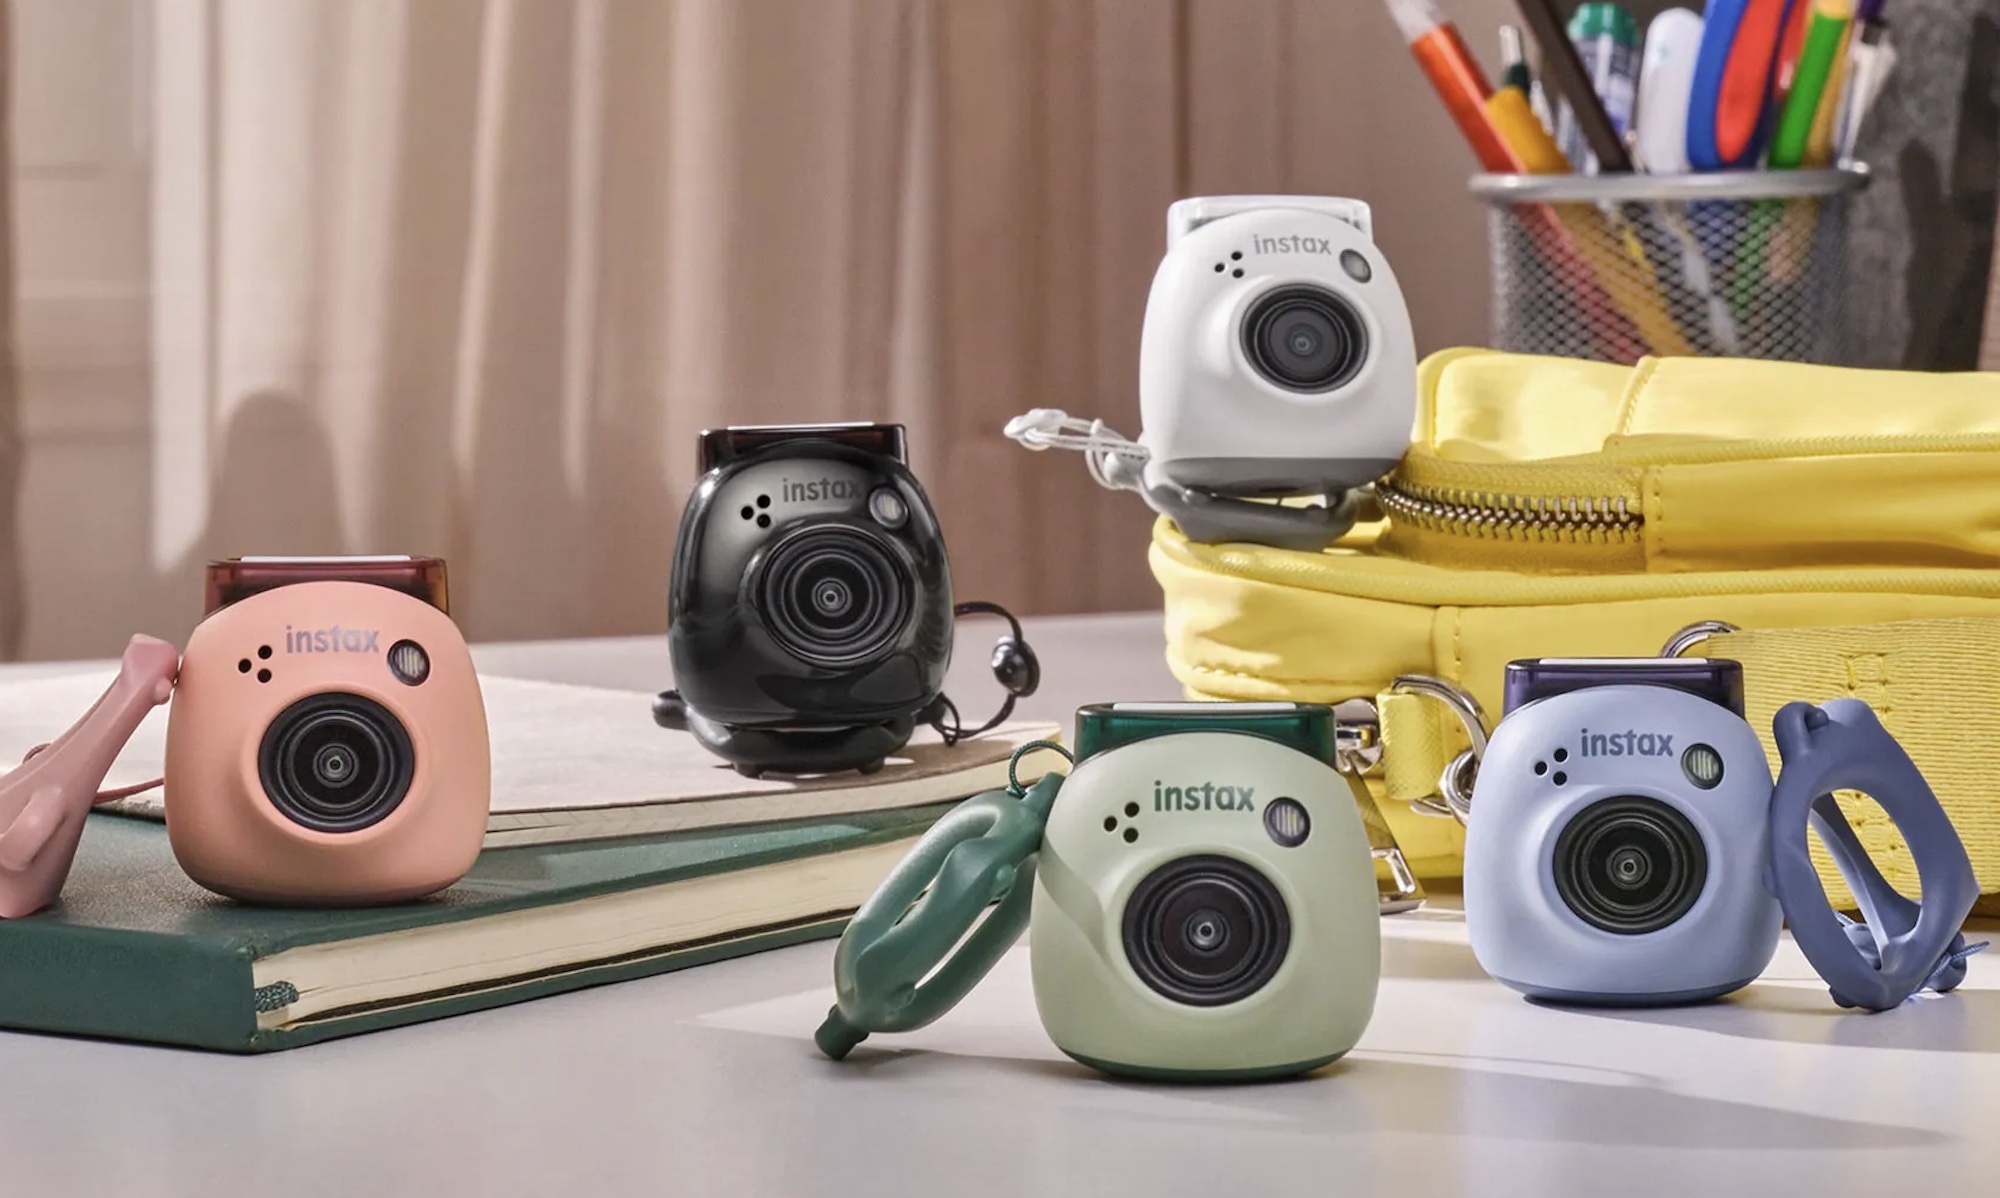 Fujifilm Instax Mini 12 Review: Looks like a toy, functions like a